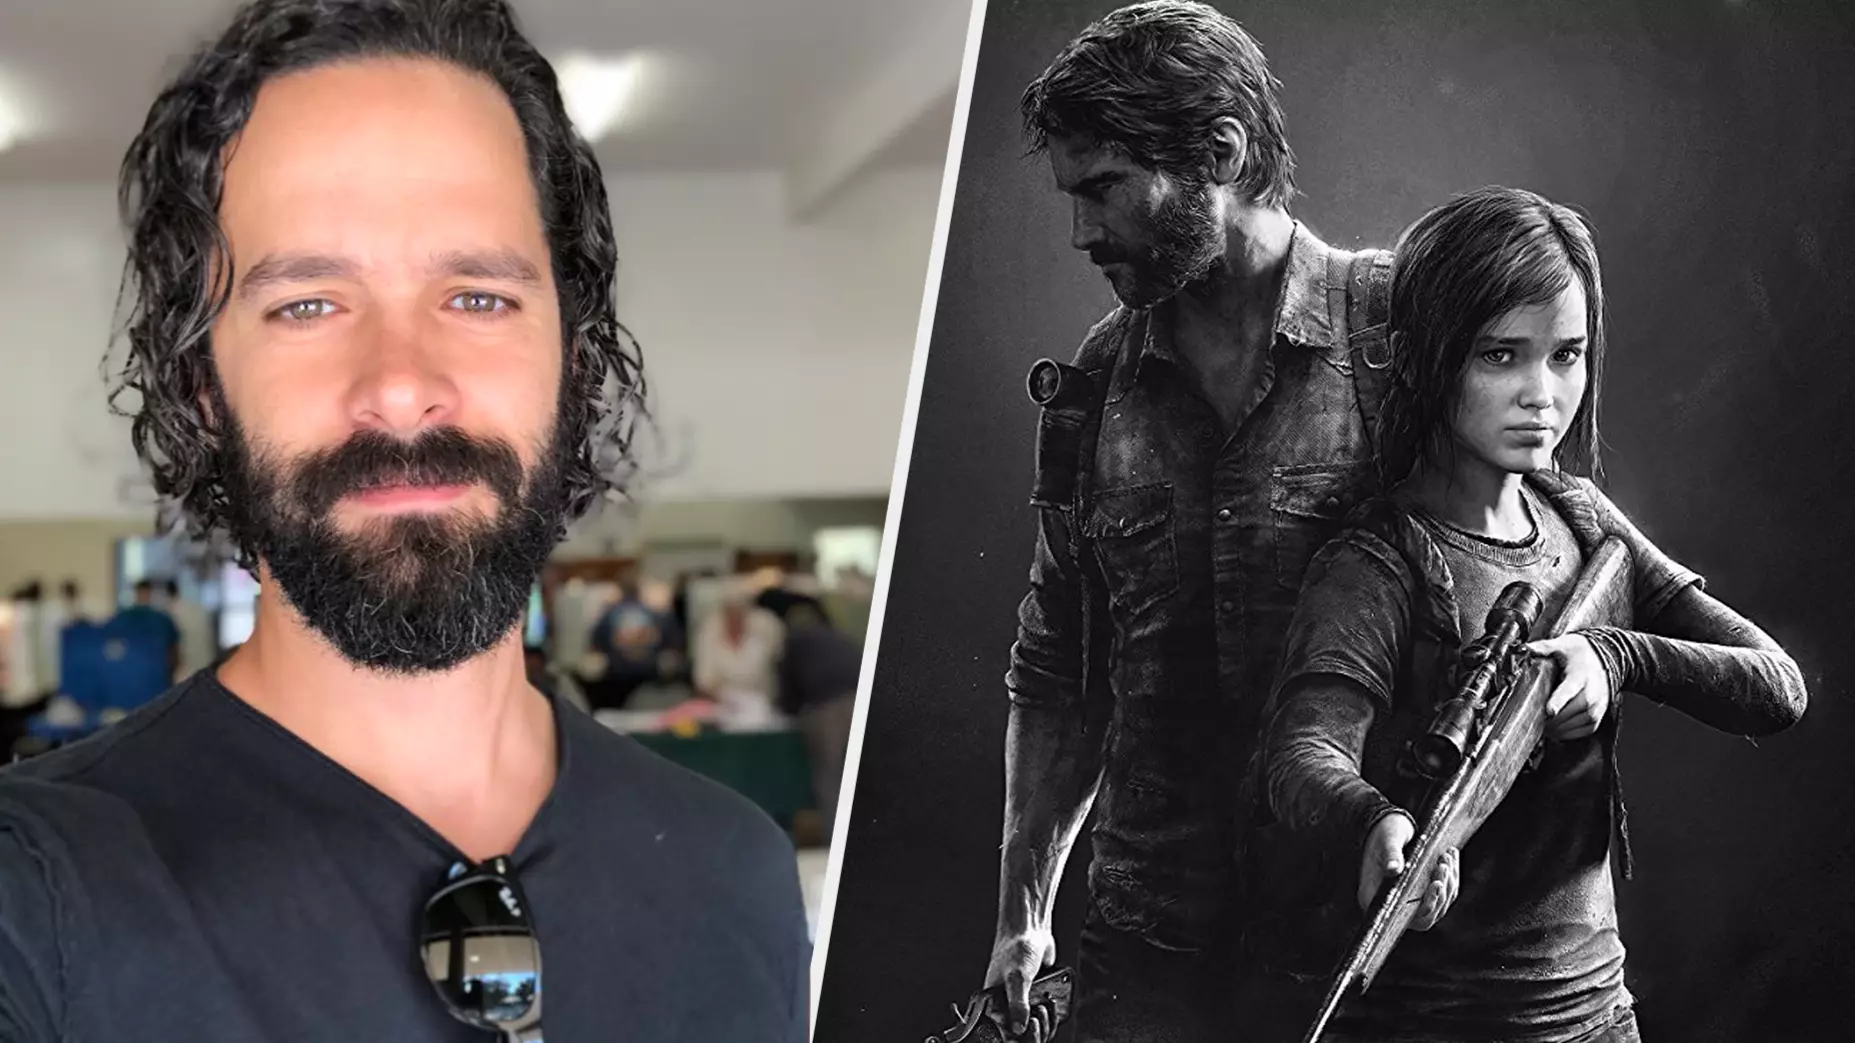 ‘The Last Of Us’ Game Director Neil Druckmann Is A Director On The HBO Show